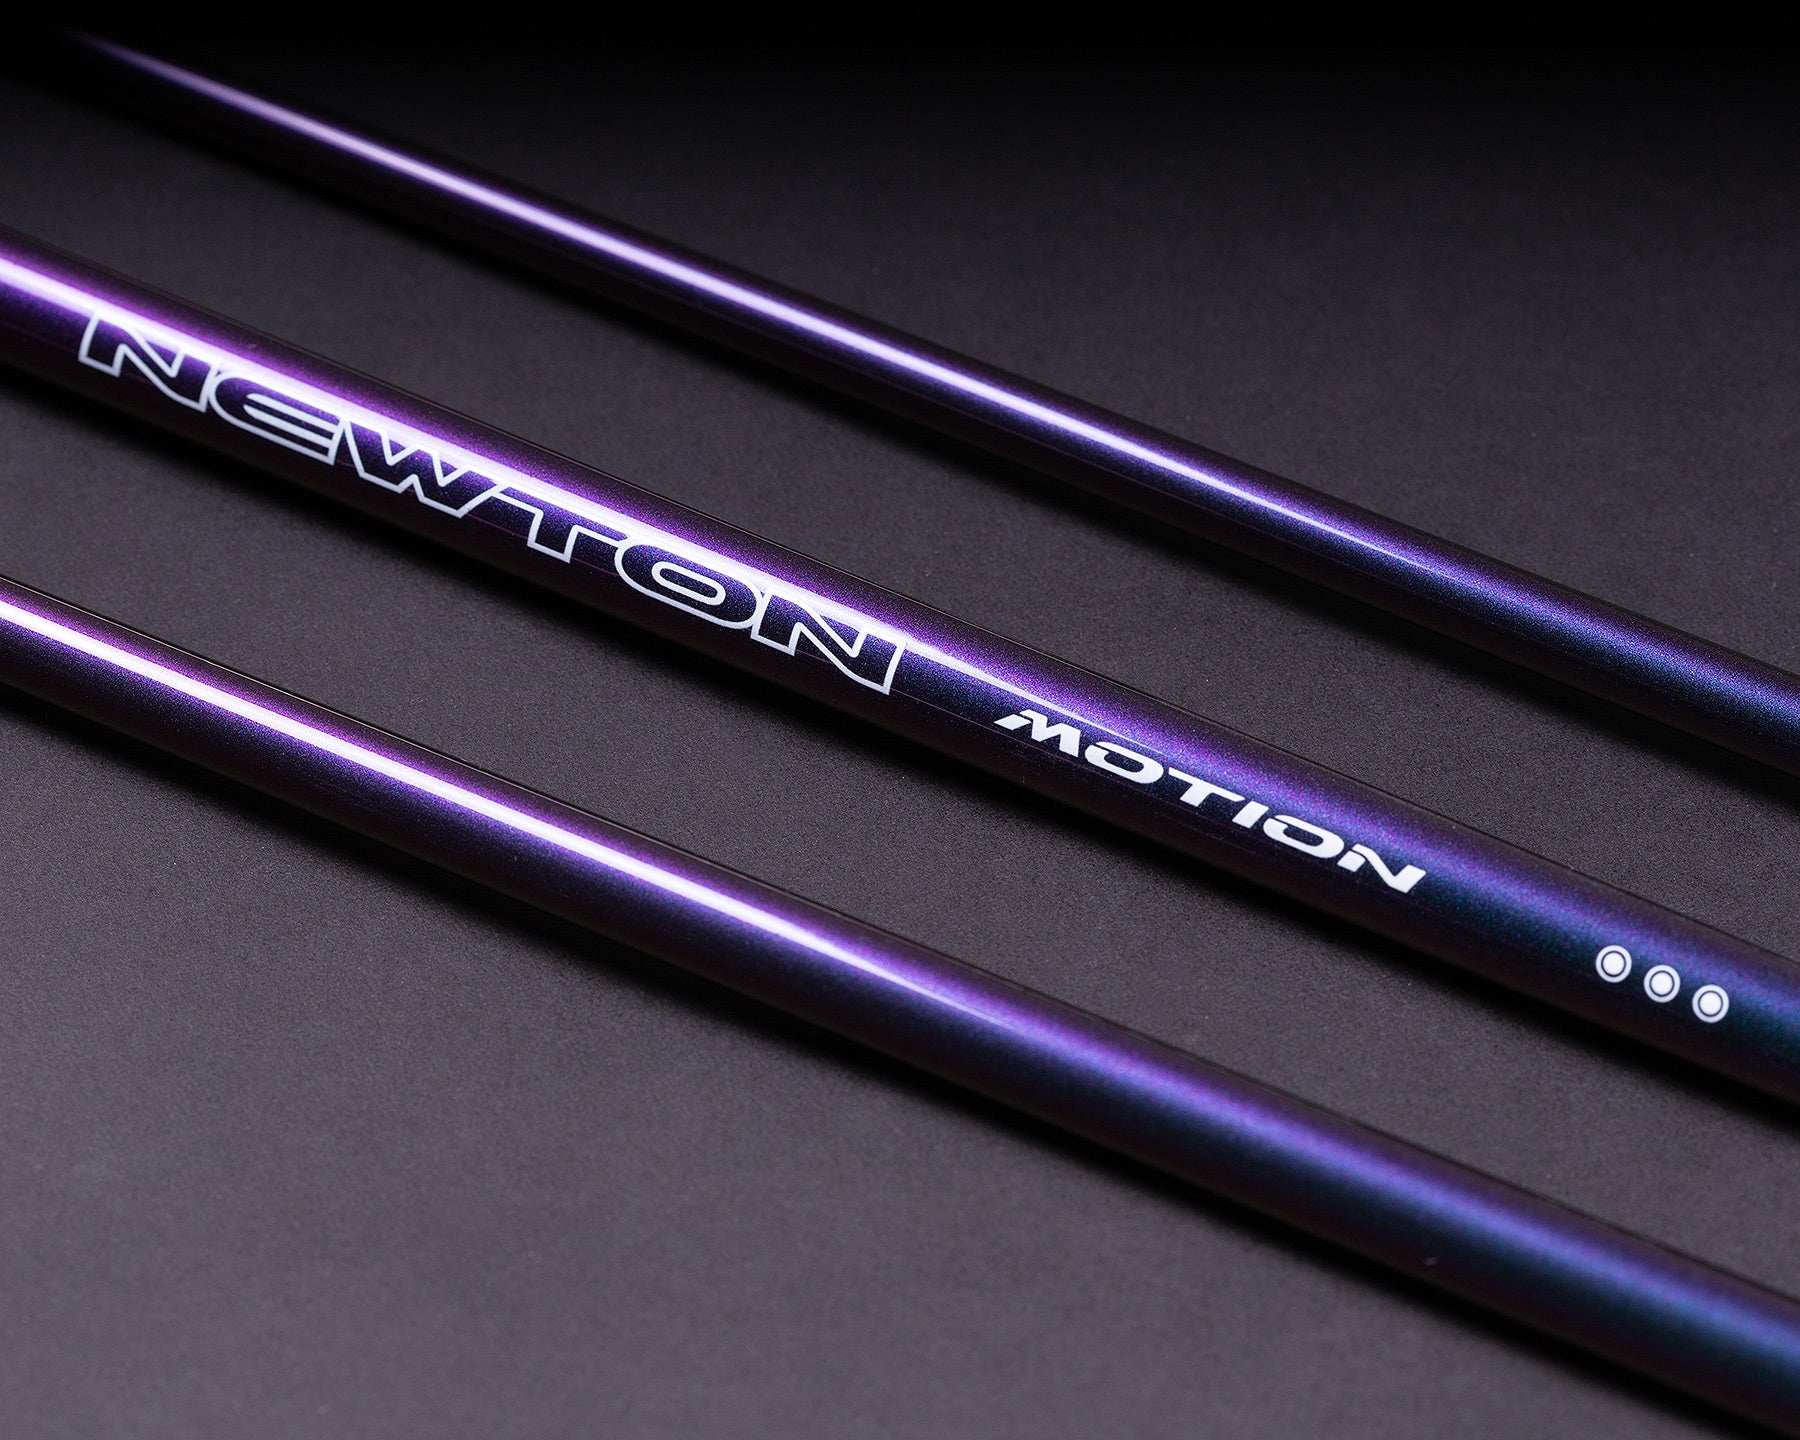  Newton Motion Golf Driver Shaft for Callaway Drivers